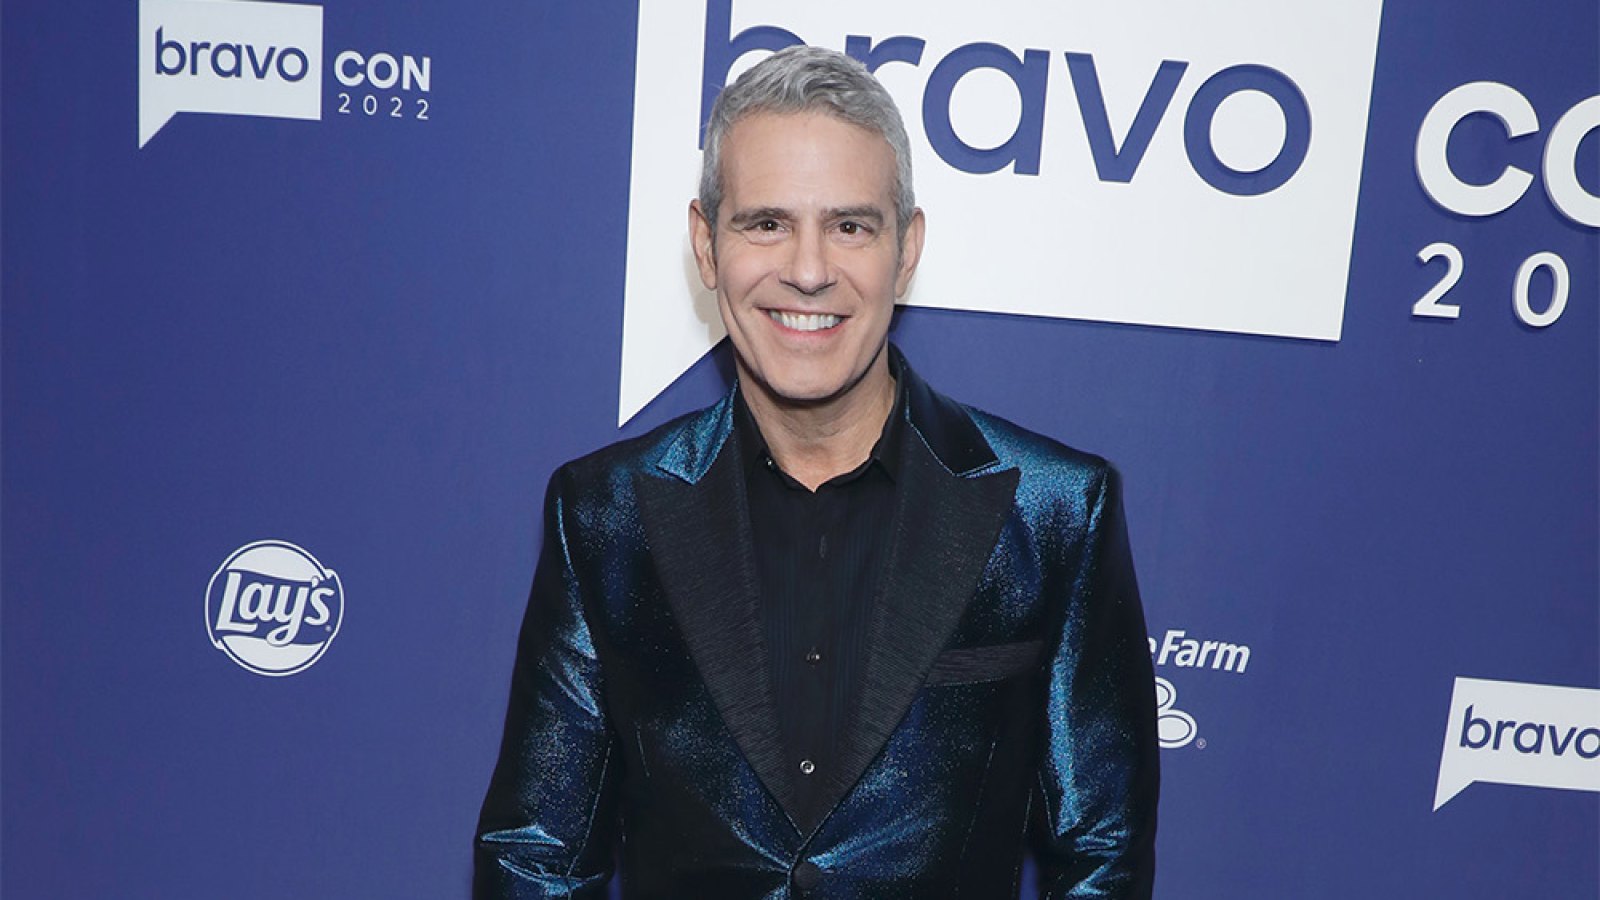 Andy Cohen Breaks Down Why a 'Love is Blind' Reunion was a 'Very Bad Idea' Following Streaming Issues: 'You Can't Just Bang It Out'